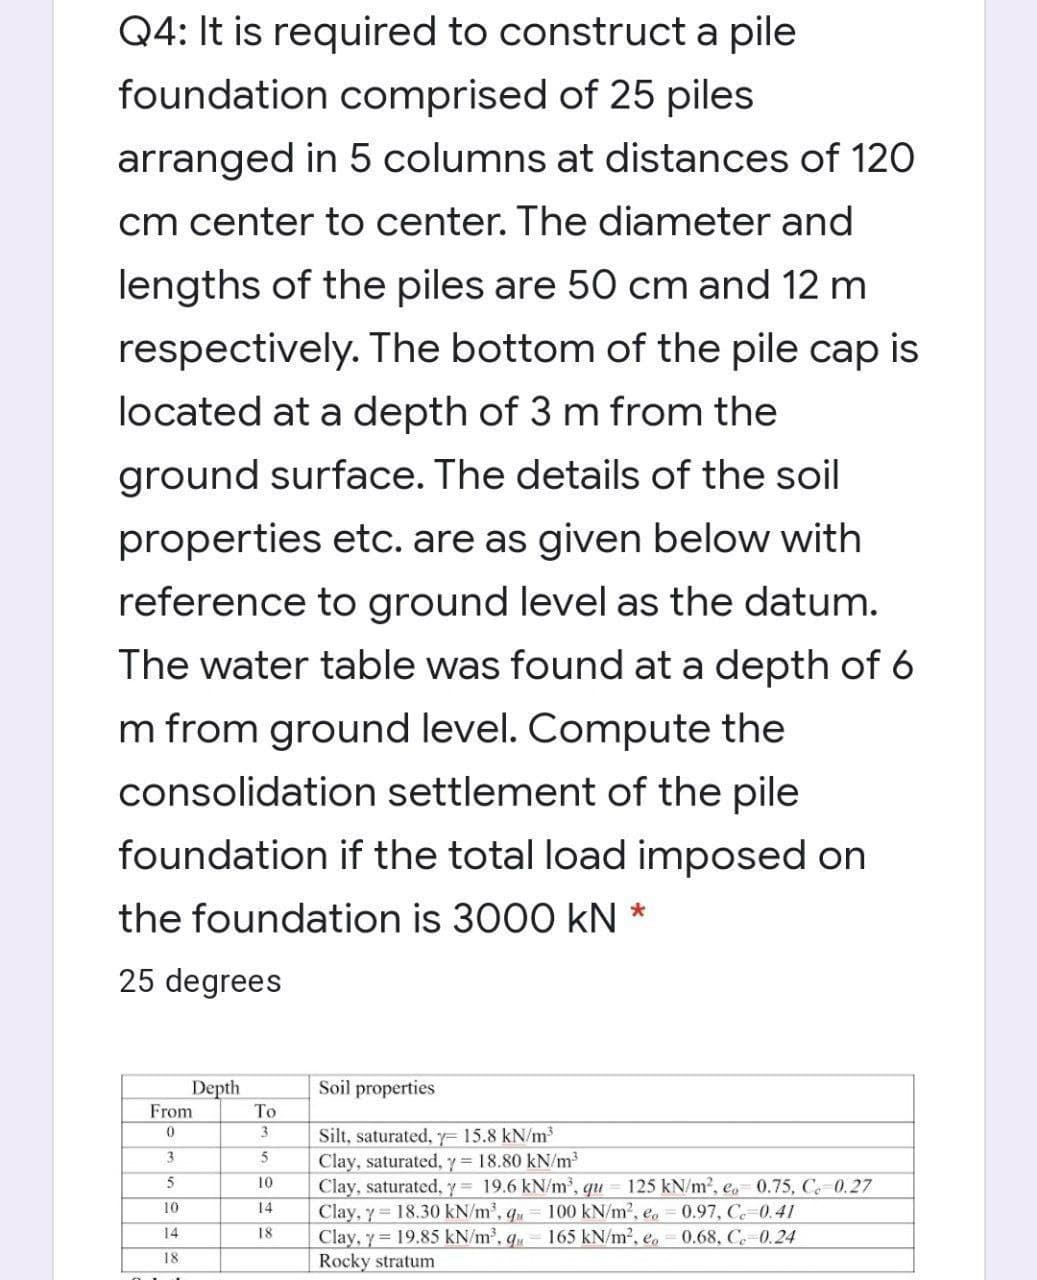 Q4: It is required to construct a pile
foundation comprised of 25 piles
arranged in 5 columns at distances of 120
cm center to center. The diameter and
lengths of the piles are 50 cm and 12 m
respectively. The bottom of the pile cap is
located at a depth of 3 m from the
ground surface. The details of the soil
properties etc. are as given below with
reference to ground level as the datum.
The water table was found at a depth of 6
m from ground level. Compute the
consolidation settlement of the pile
foundation if the total load imposed on
*
the foundation is 3000 KN
25 degrees
Depth
Soil properties
From
0
Silt, saturated, y= 15.8 kN/m³
3
Clay, saturated, y = 18.80 kN/m³
5
Clay, saturated, y = 19.6 kN/m³, qu 125 kN/m², eo 0.75, C 0.27
10
Clay, y = 18.30 kN/m³, qu = 100 kN/m², eo = 0.97, Ce=0.41
14
Clay, y 19.85 kN/m³, g 165 kN/m², eo -0.68, Ce-0.24
Rocky stratum
18
To
3
5
10
14
18